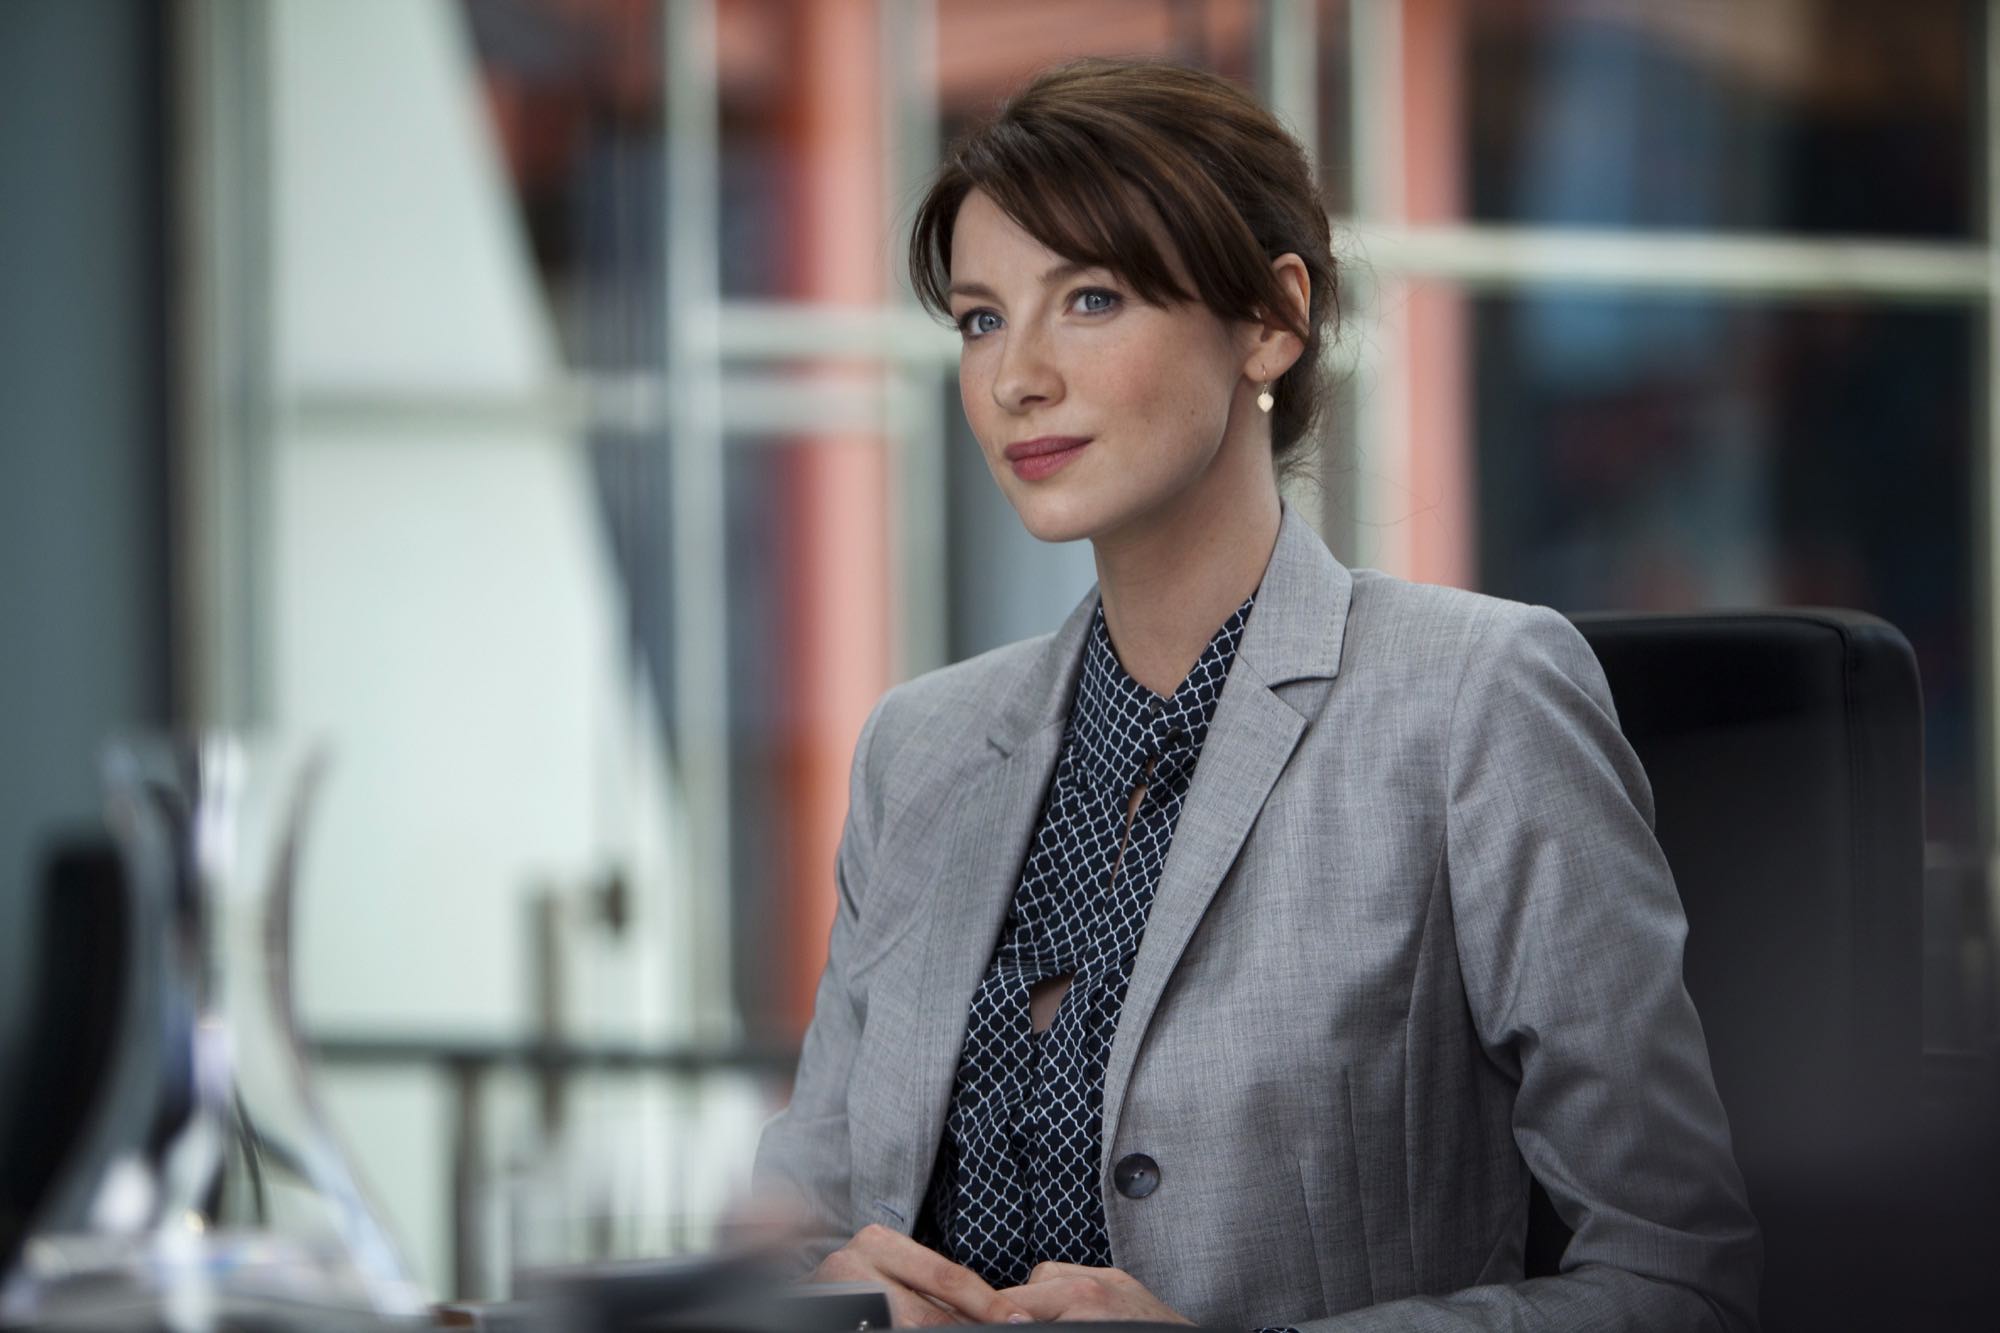 New/Old HQ Pic of Caitriona Balfe in 'Escape Plan' - Outlander On...